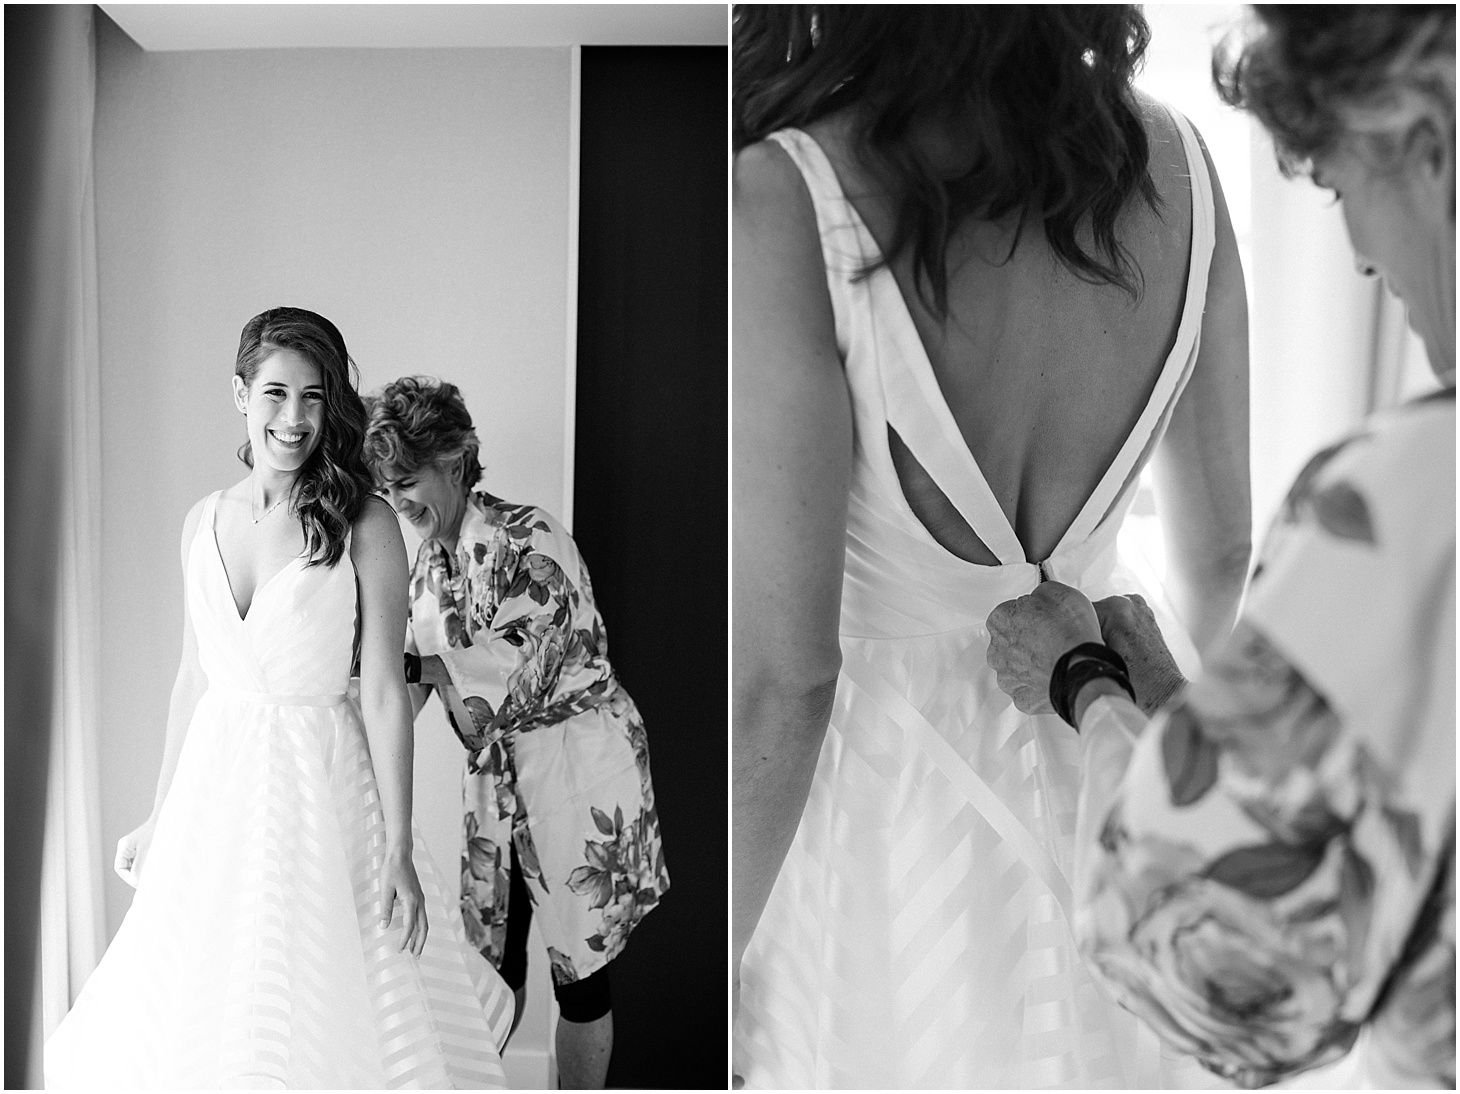 Bride getting ready in the Water Suite at the Intercontinental Hotel-The Wharf | Hayley Paige Wedding Gown | Chic and Modern Interfaith Wedding at District Winery in Washington, DC | Sarah Bradshaw Photography